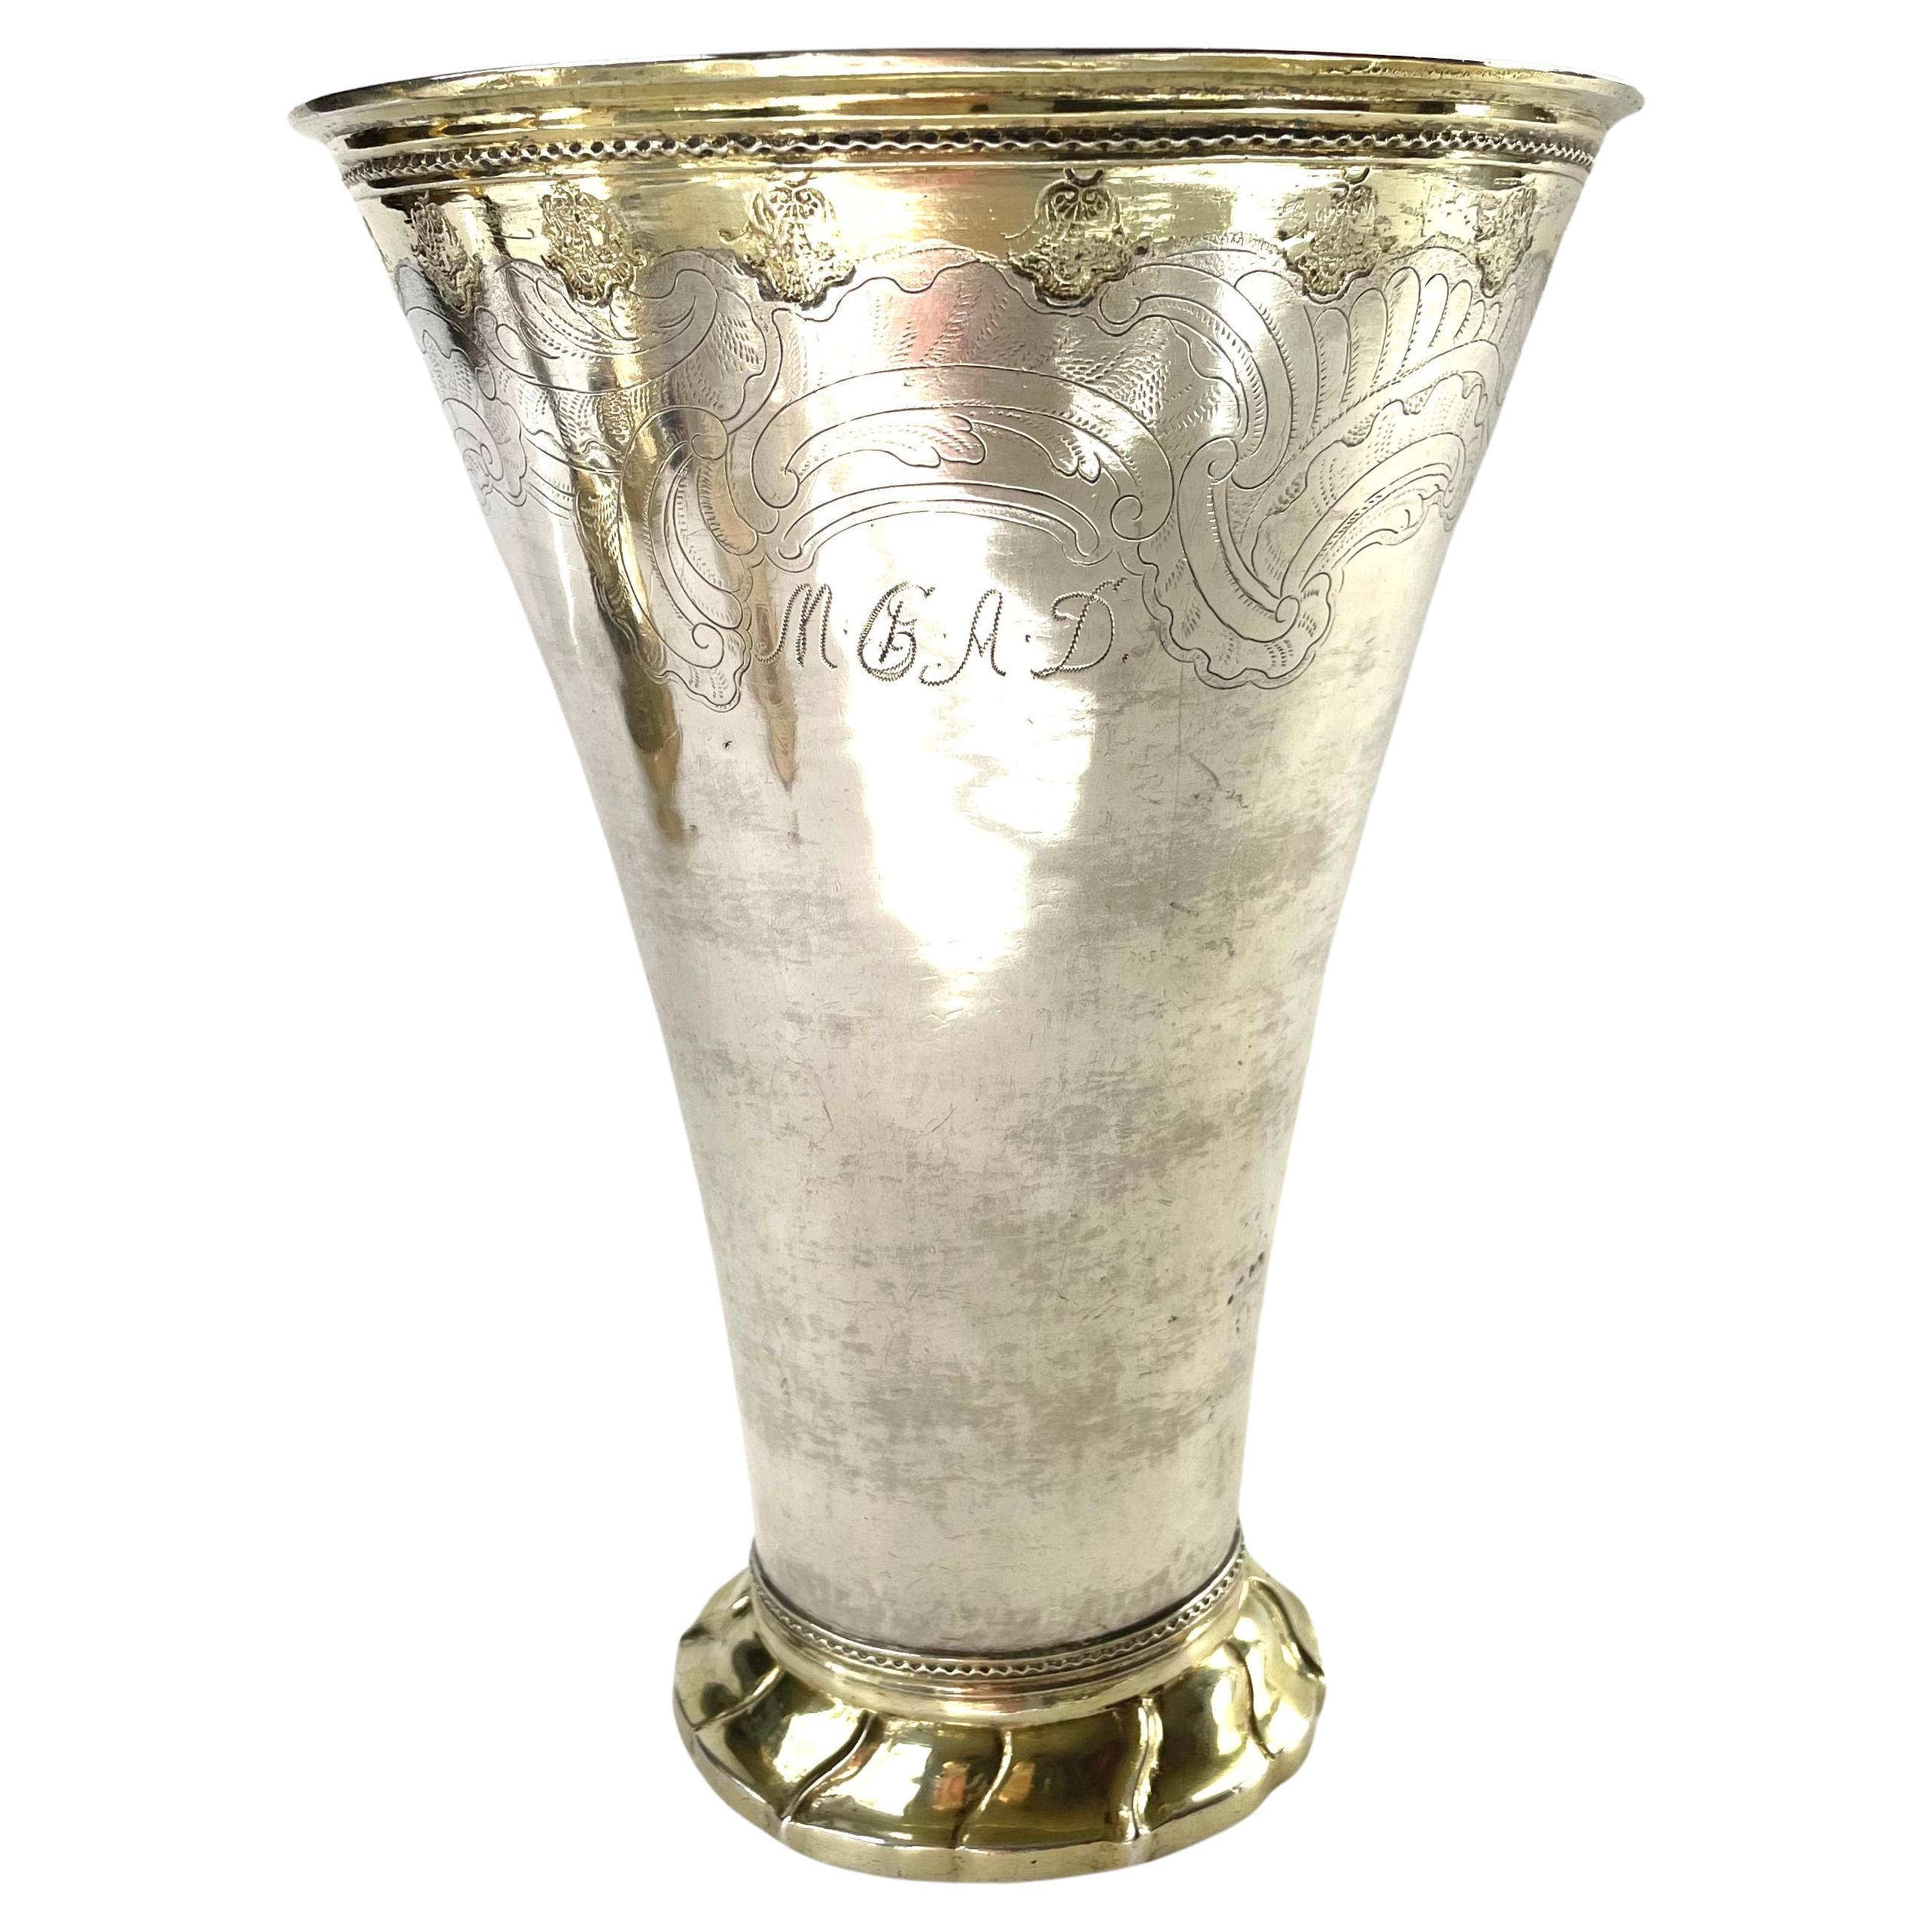 Goblet in Silver, partly gilded. Rococo by S. Westerstråhle the elder from 1765